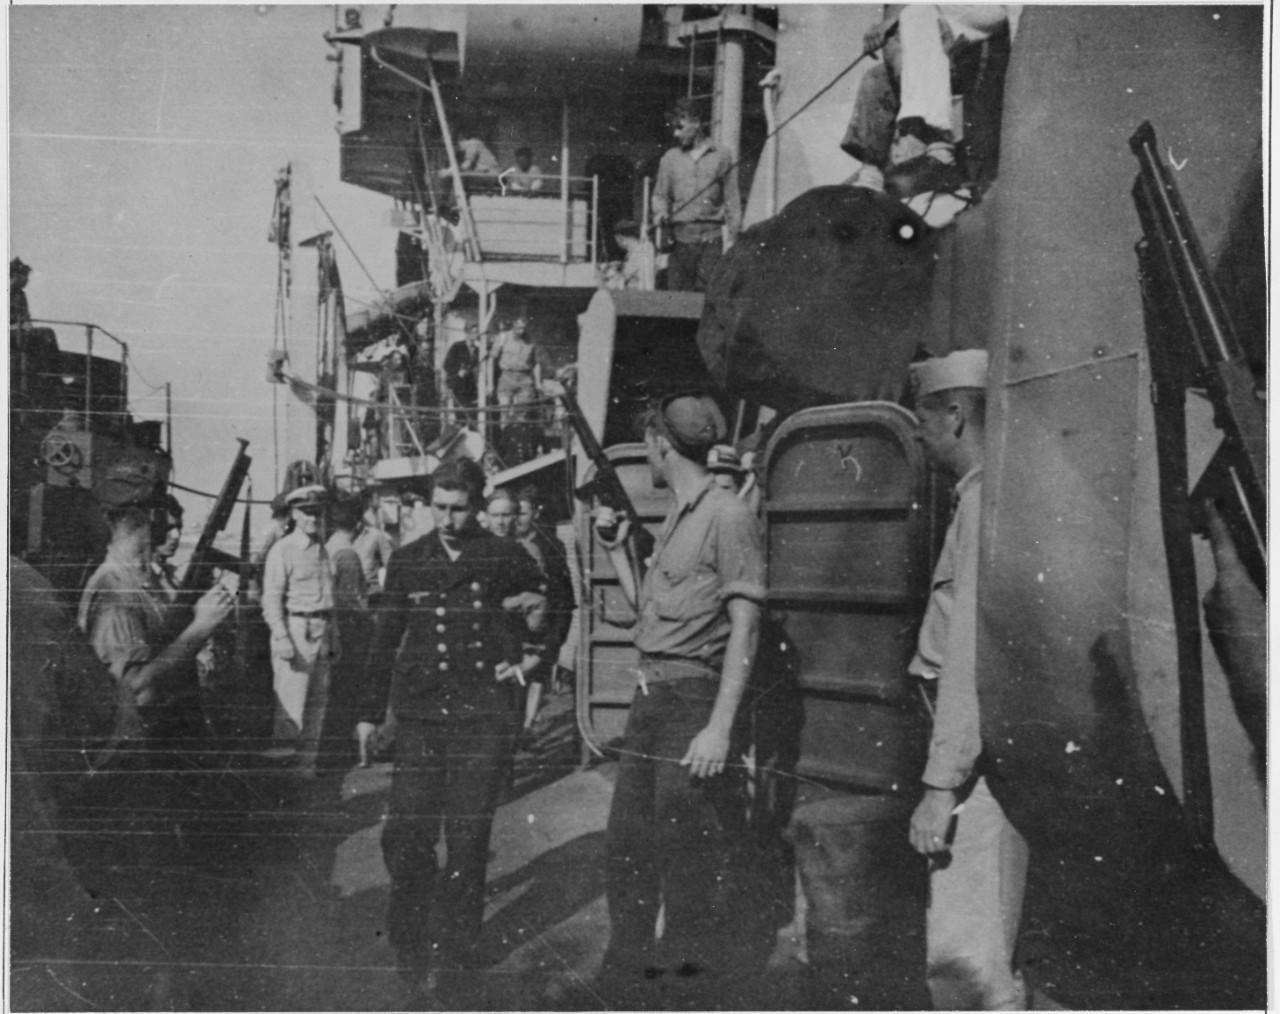 USS ENDICOTT. German officer being marched off. Dr. Musser, August 1944